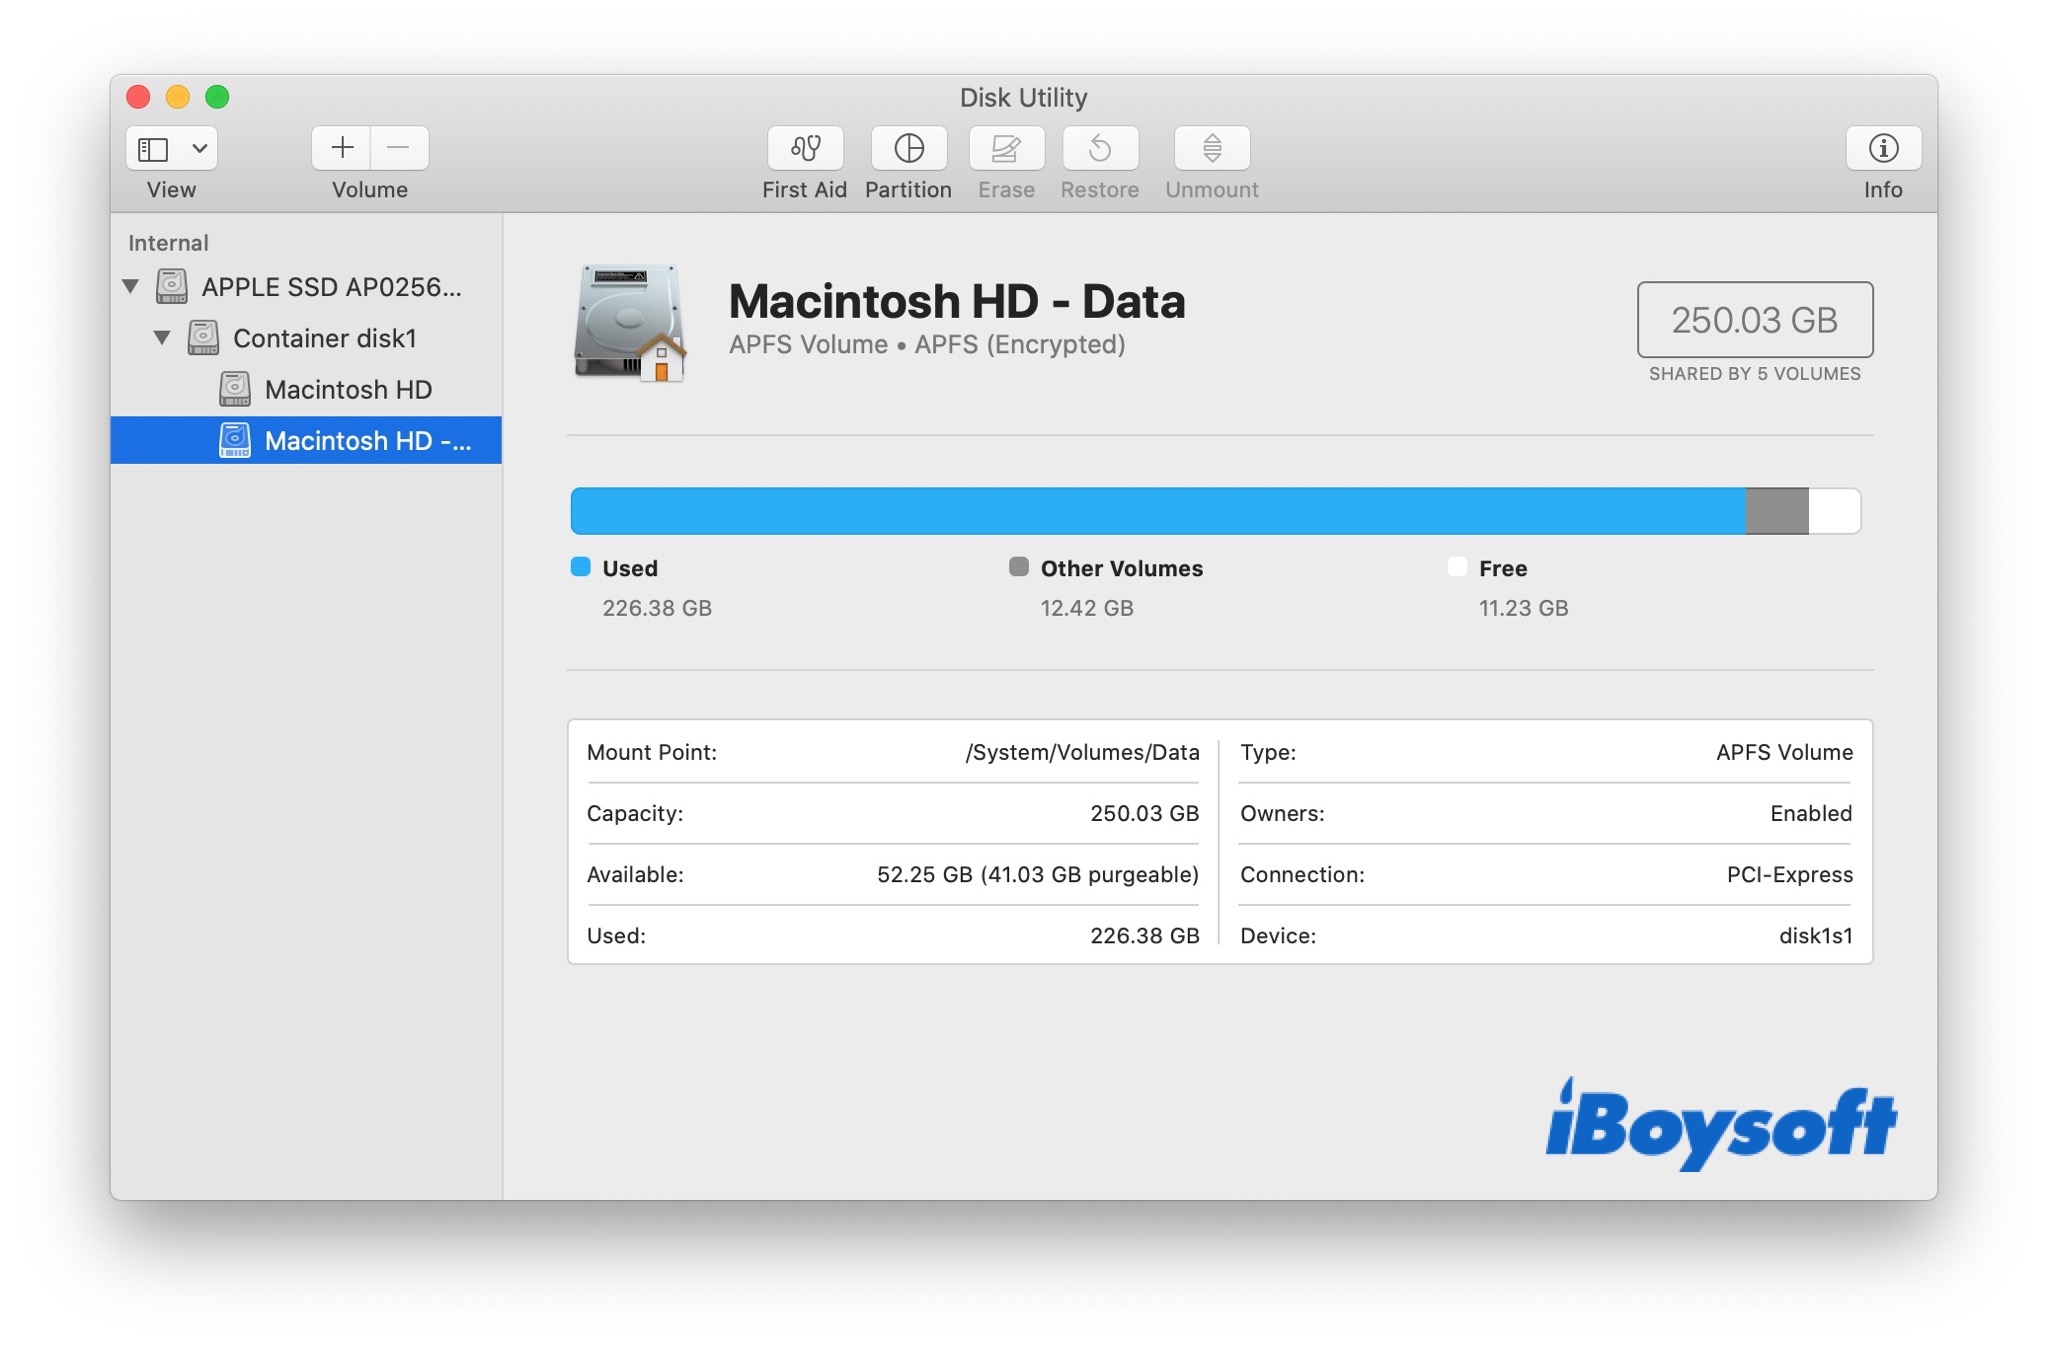 interface of Disk Utility